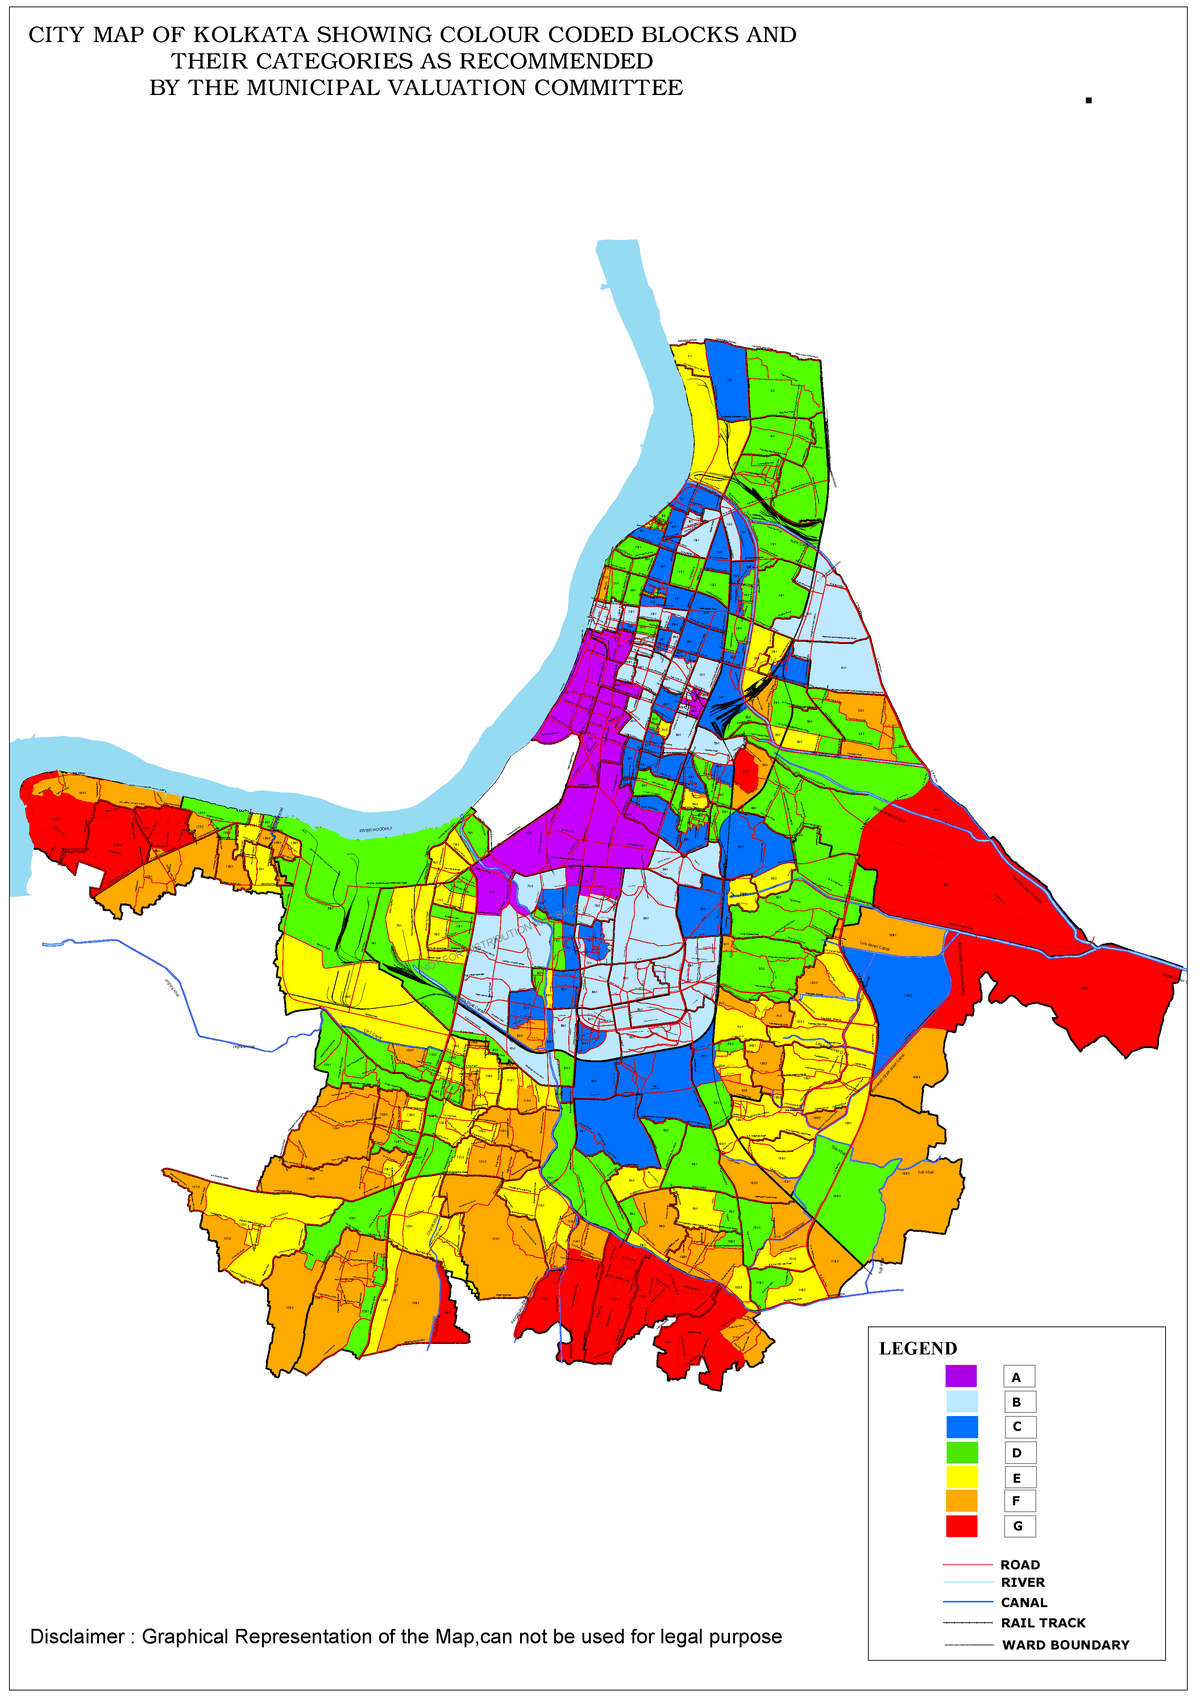 Exam 16 February, questions and answers - CITY MAP OF KOLKATA SHOWING COLOUR CODED BLOCKS AND THEIR - Studocu